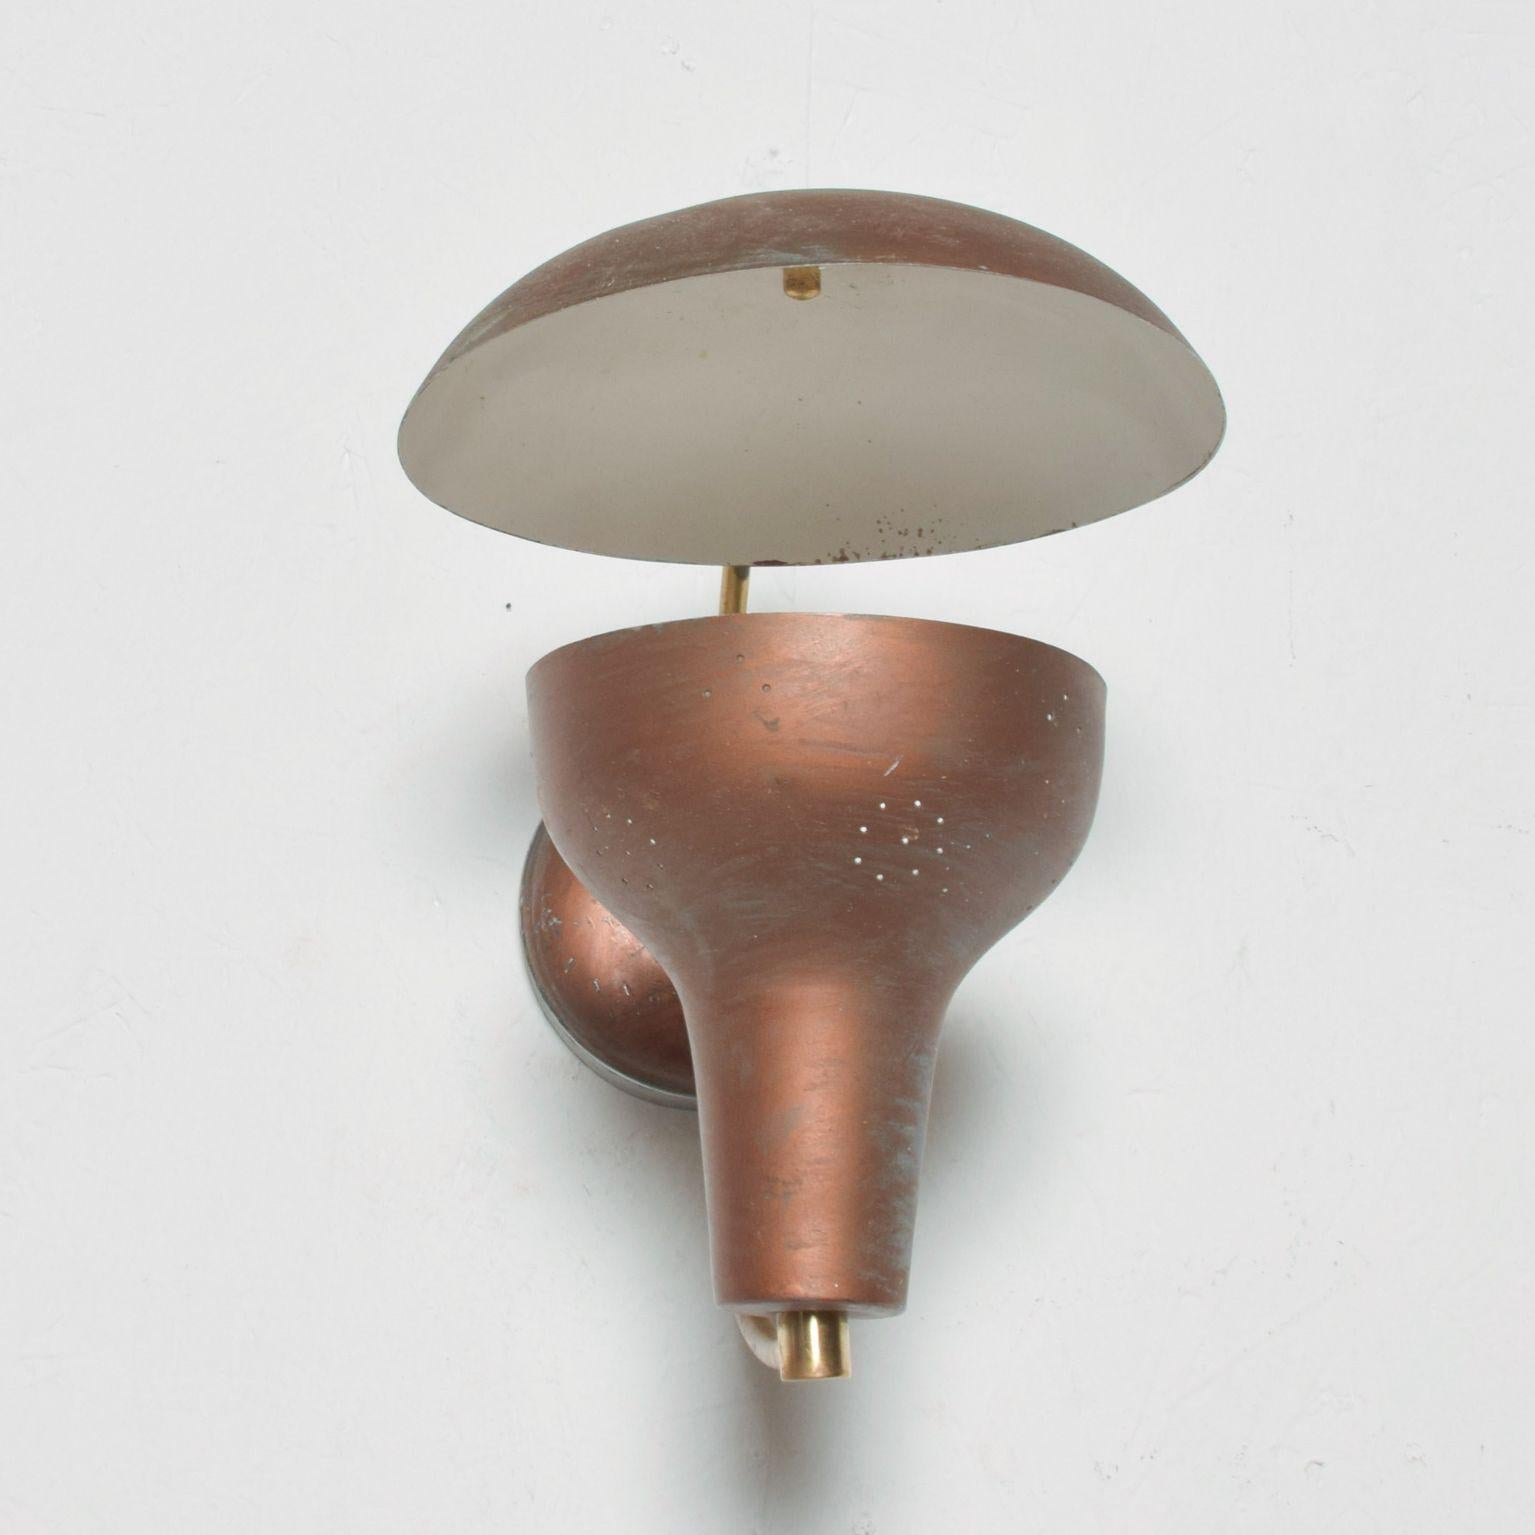 Wall Sconce
Vintage Mid Century Modern Single Brass Wall Sconce in Brown 1950s
Crafted in aluminum and brass.
Please note condition is vintage presents unrestored preowned with visible wear and use. 
Consult images
Dimensions: 10.5H x 8W x 12 D